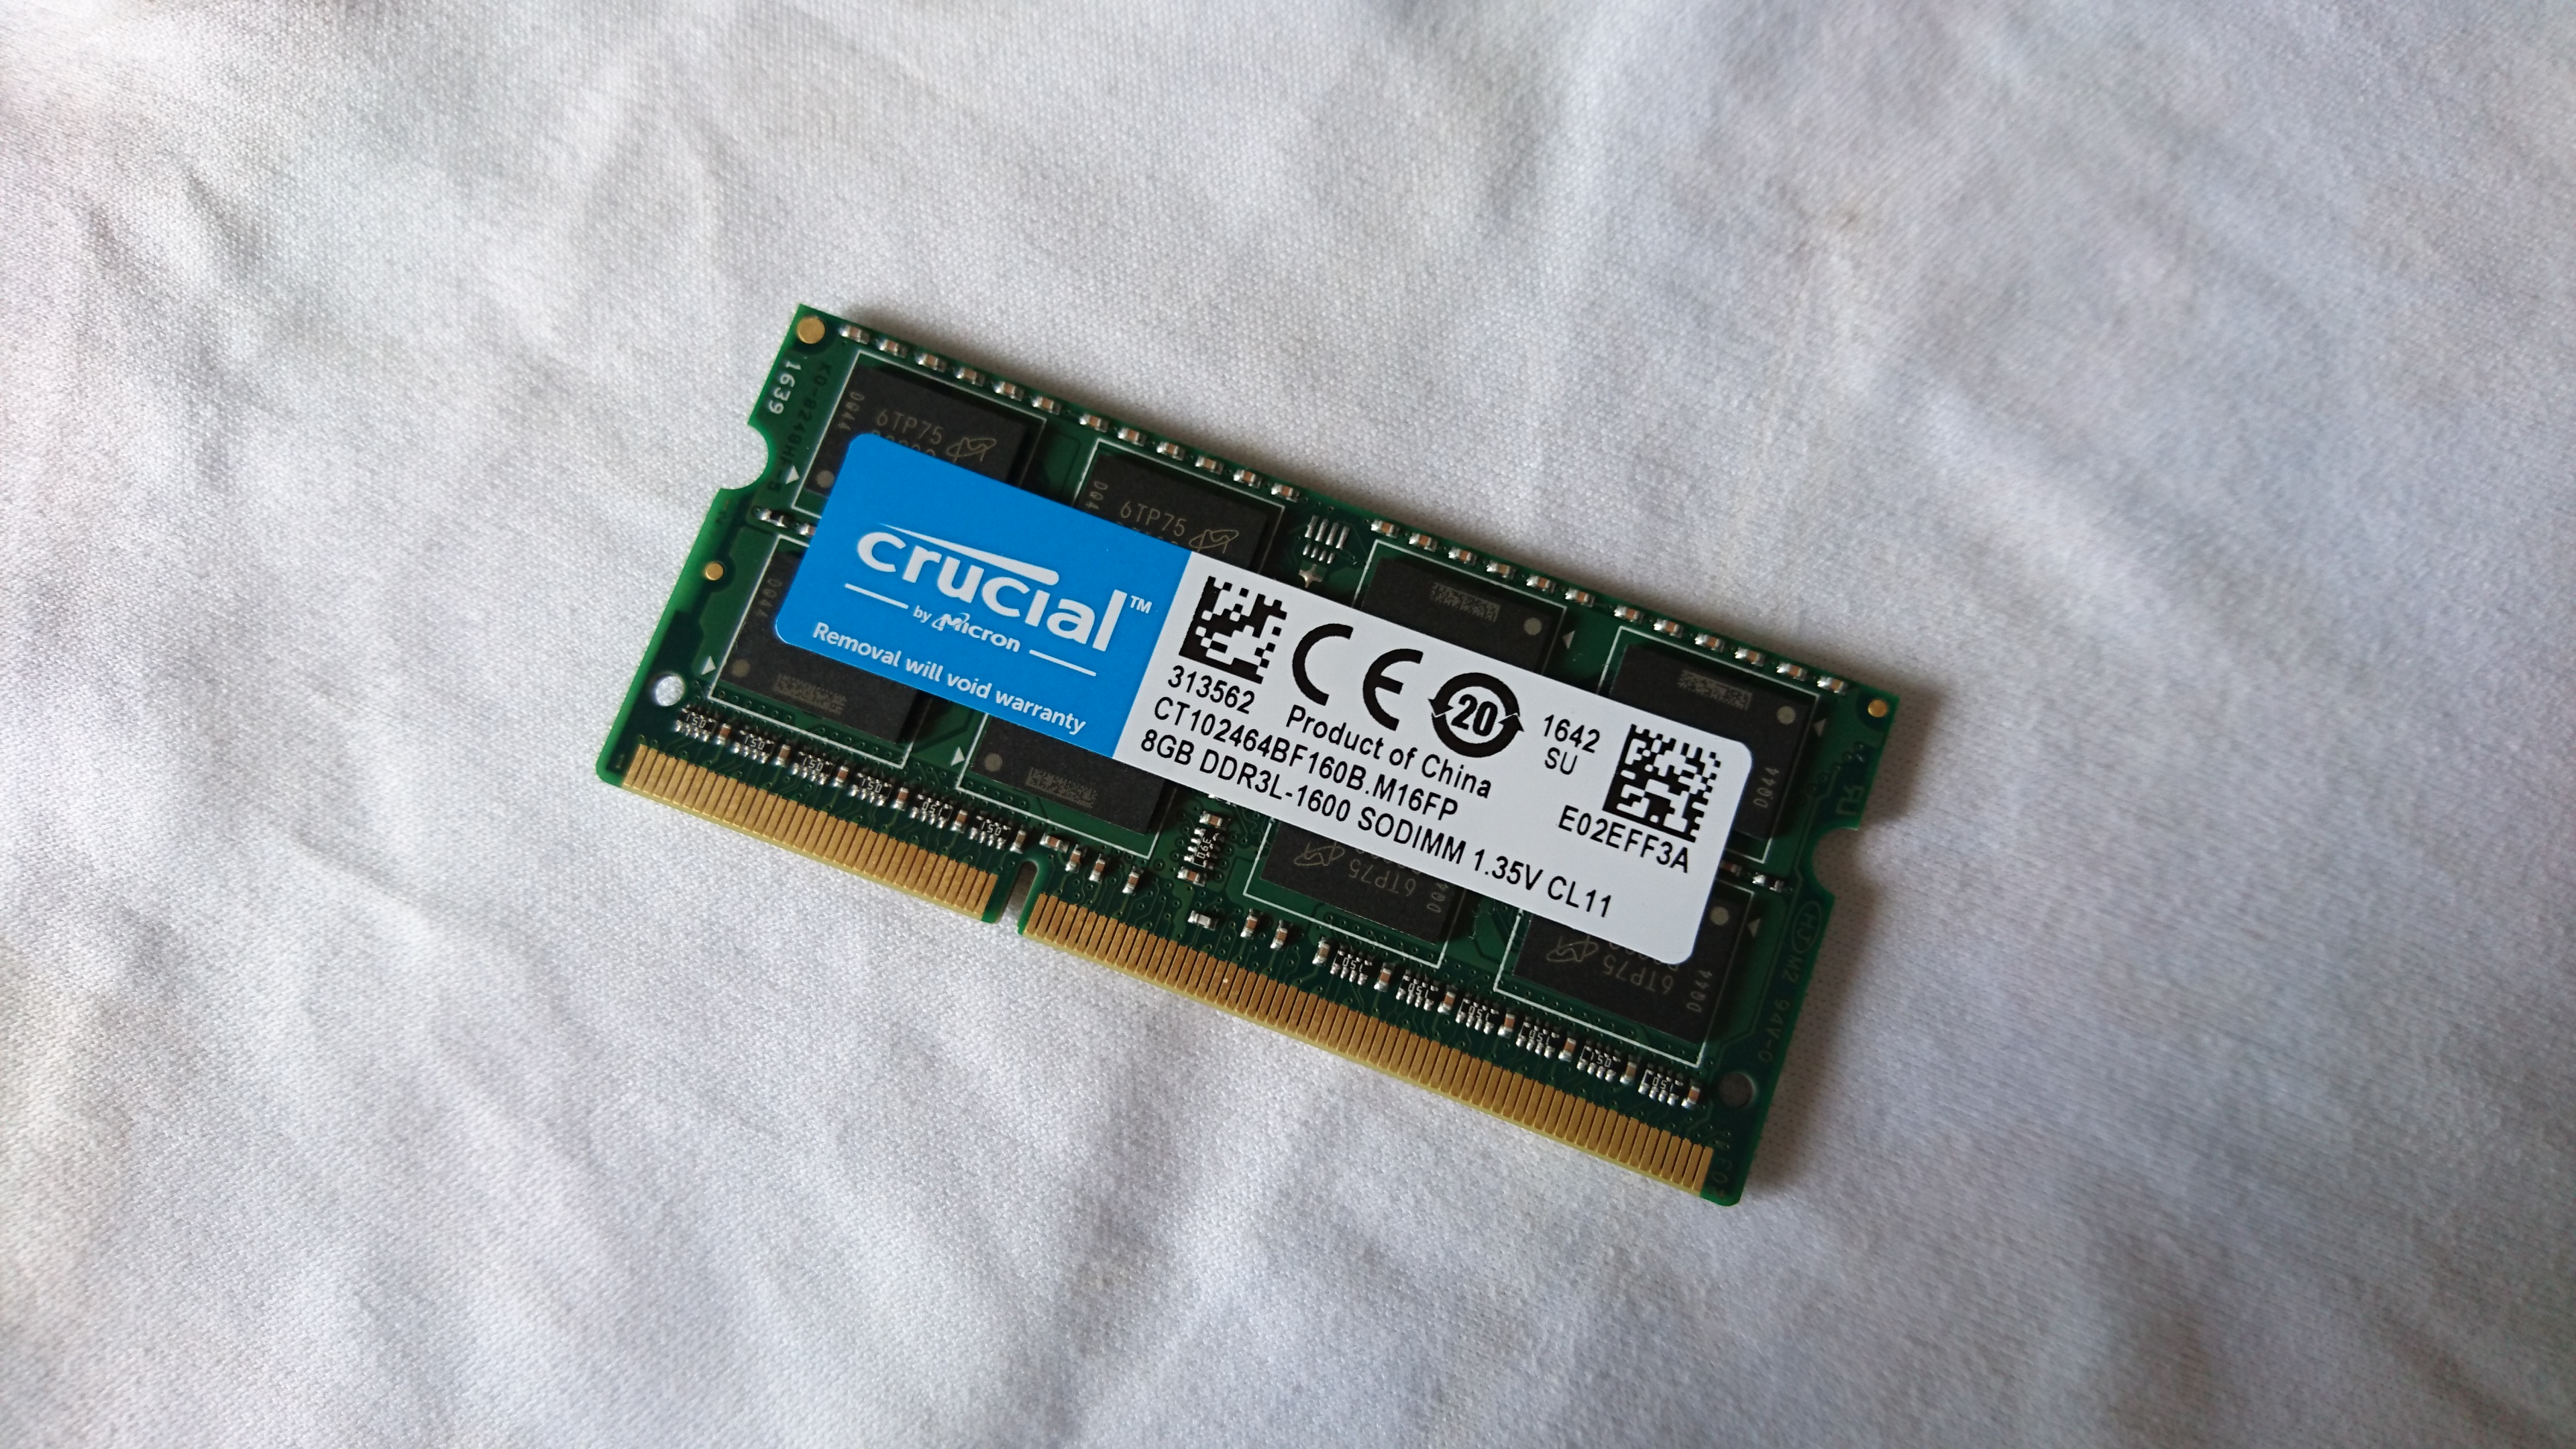 Crucial 8gb Ddr3l 1600 Sodimm Laptop Ram Electronics Computer Parts Accessories On Carousell